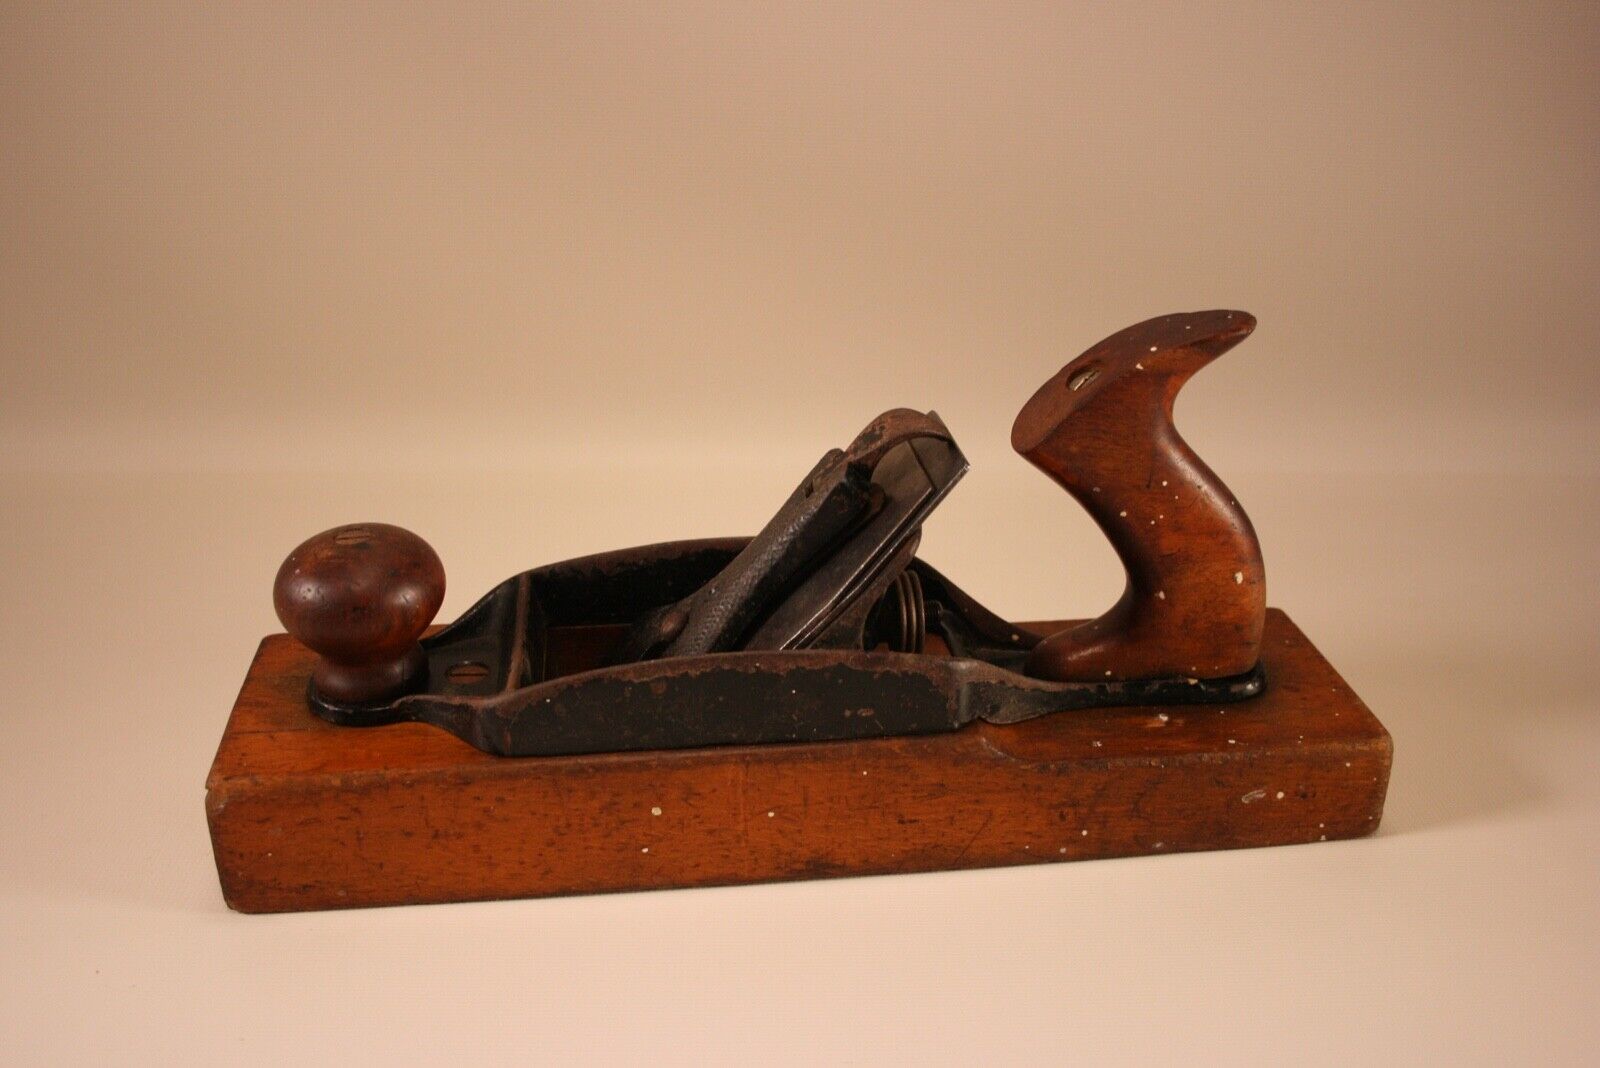 Stanley No. 37 Plane, Pre-Lateral, Type 5, c. 1874-1884